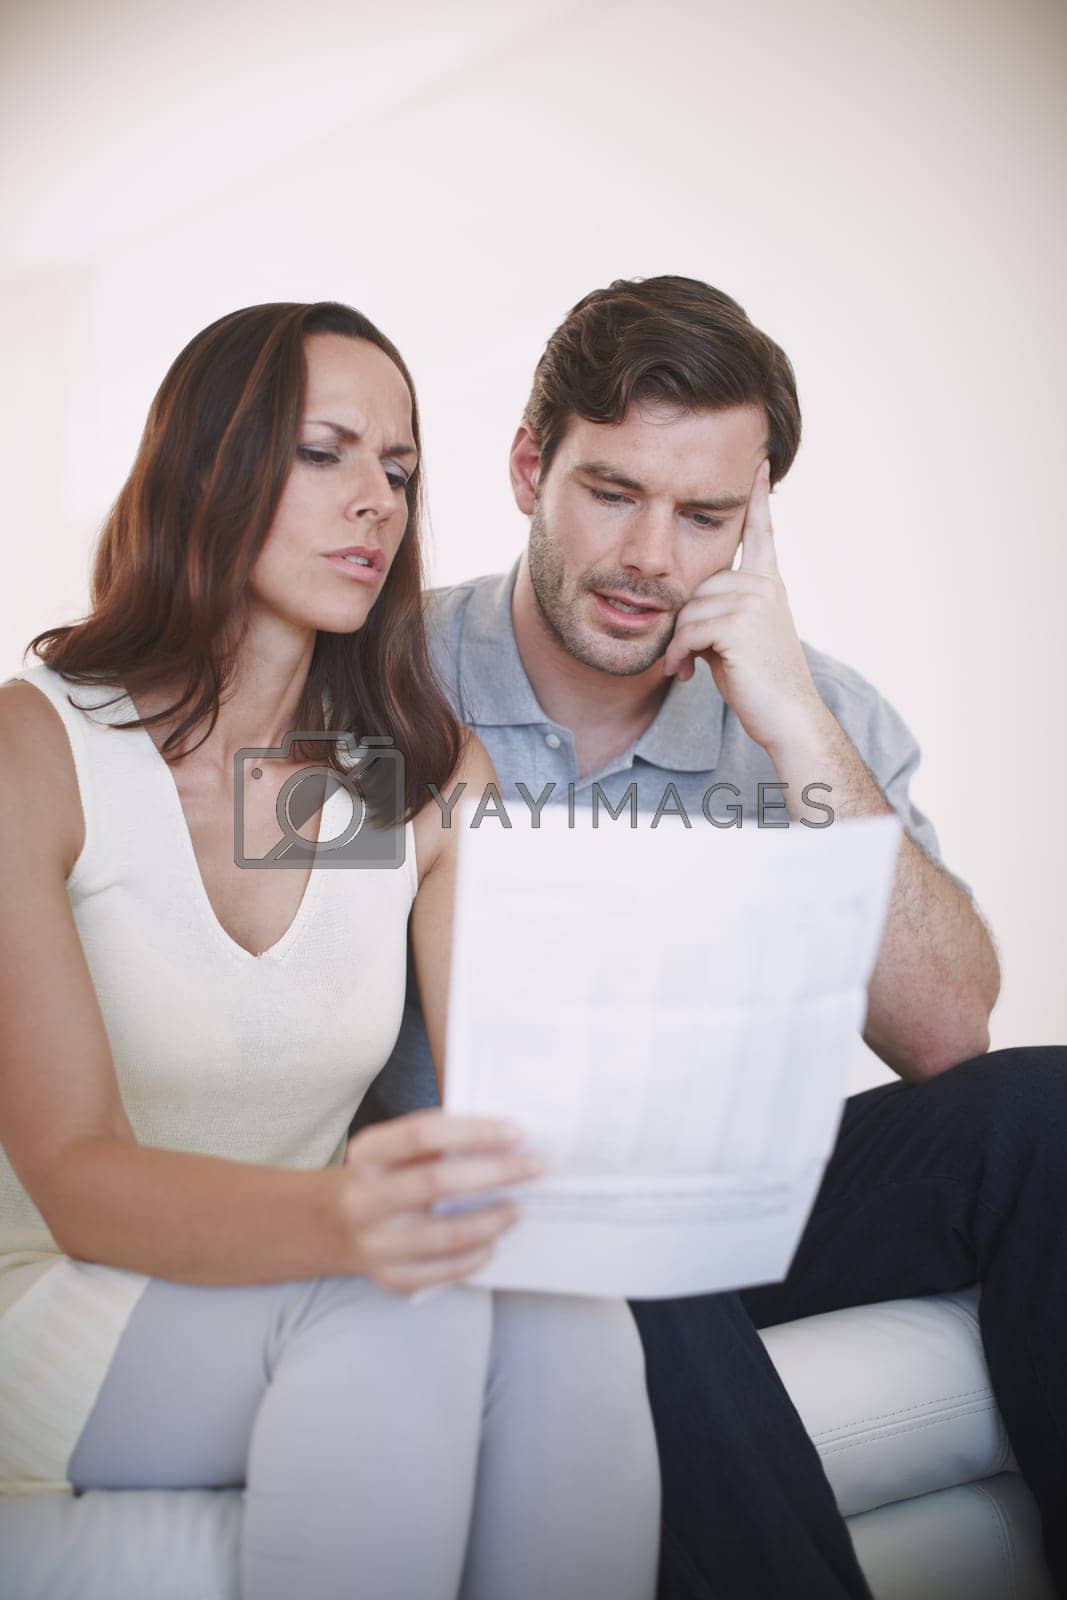 Royalty free image of This is going to be a tough month...A married couple having a serious discussion about their home finances while inspecting a bill. by YuriArcurs